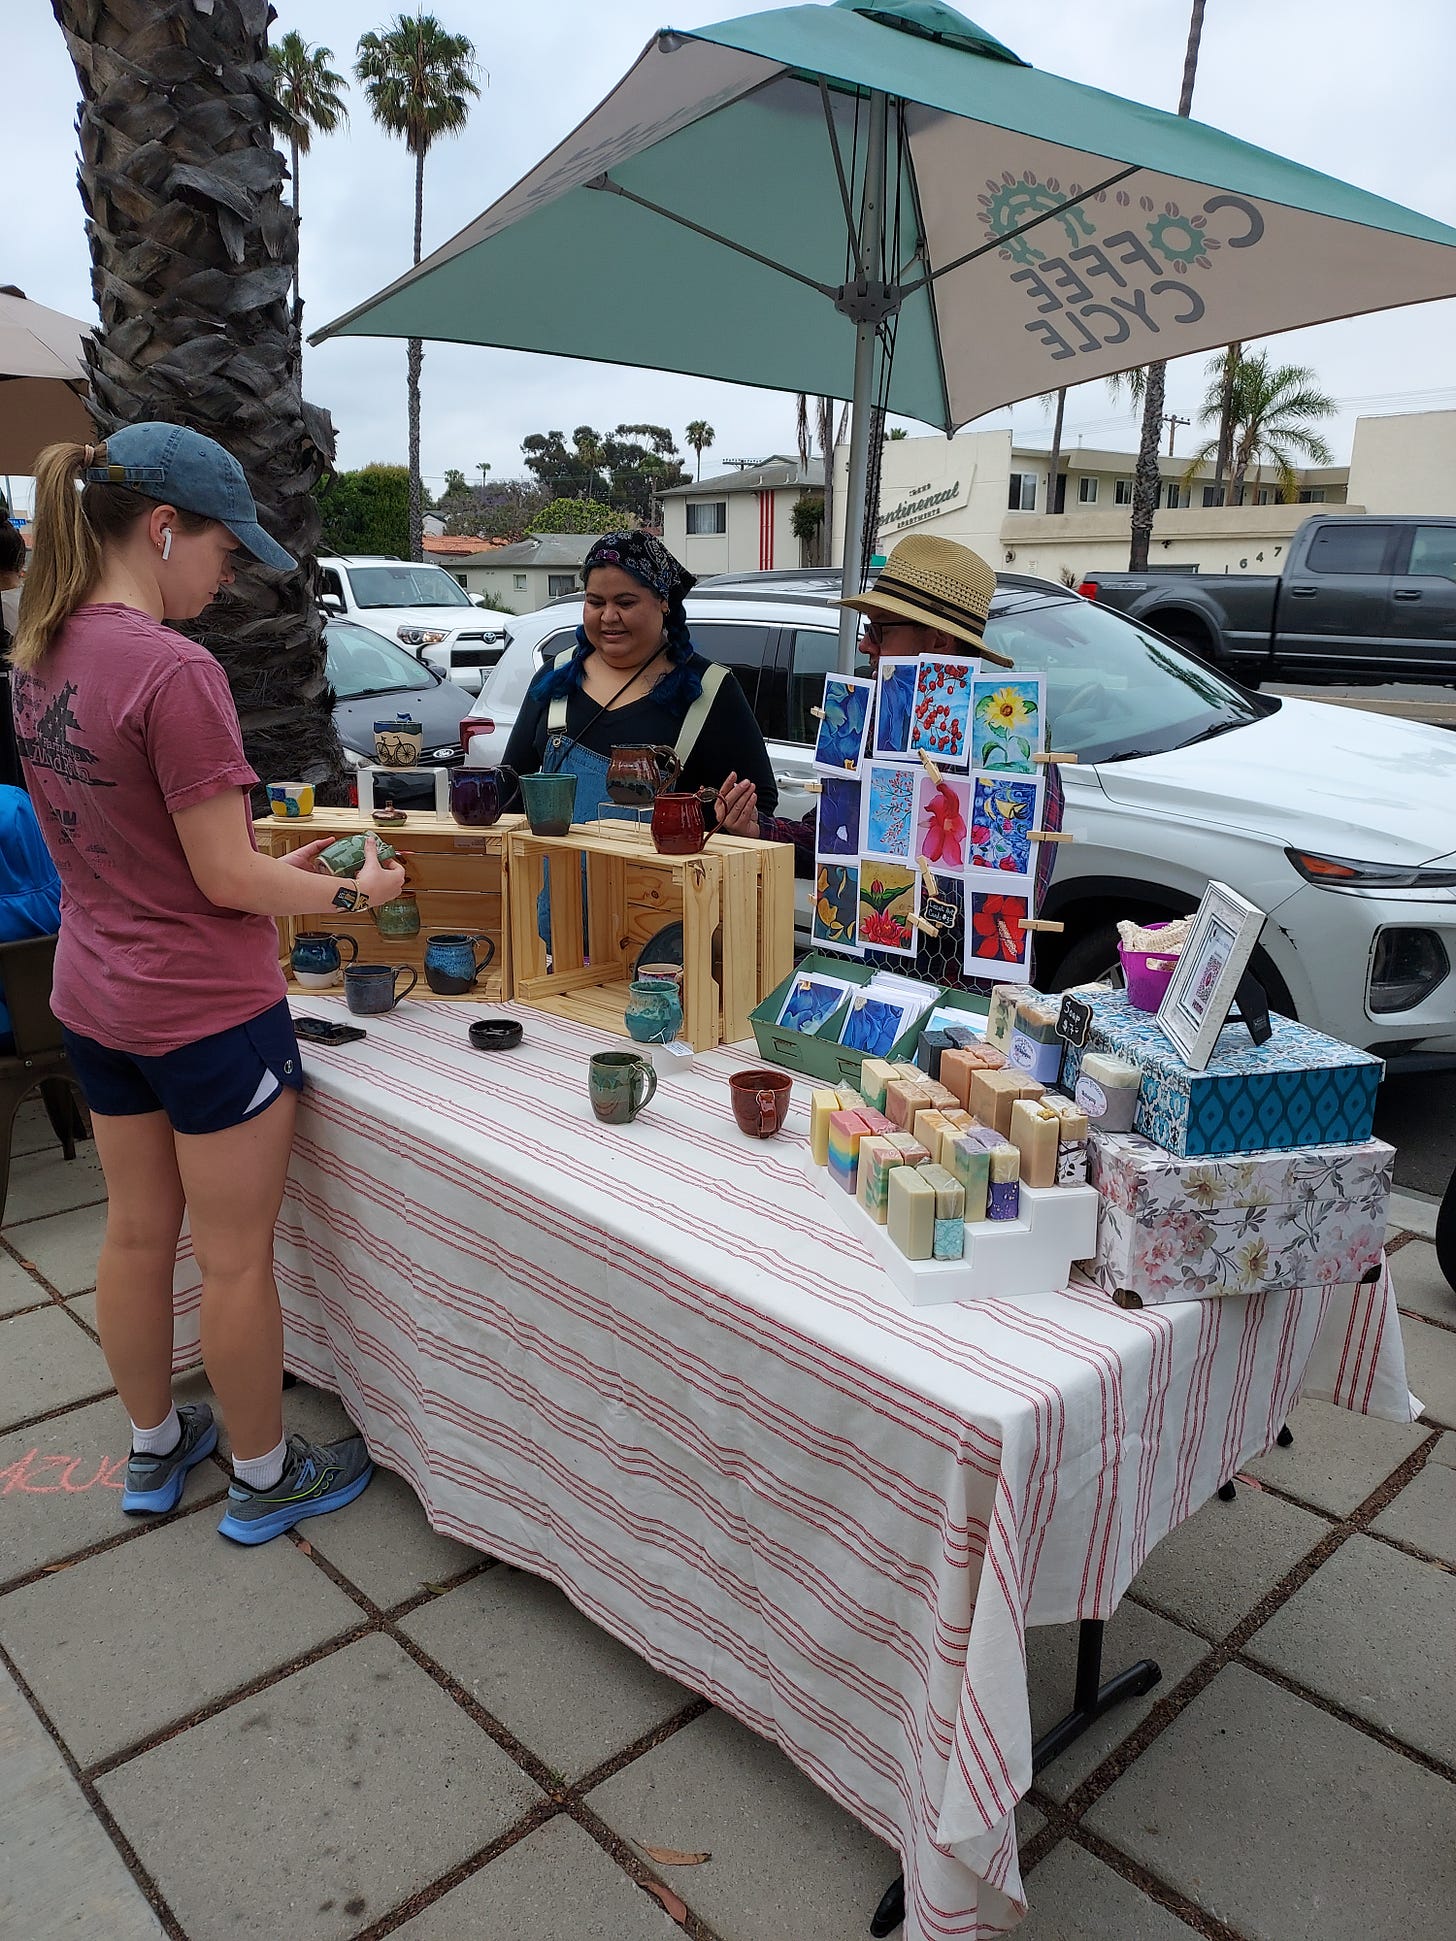 A jogger stops to admire handmade clay mugs and homemade soaps at a makers market on a SoCal sidewalk.